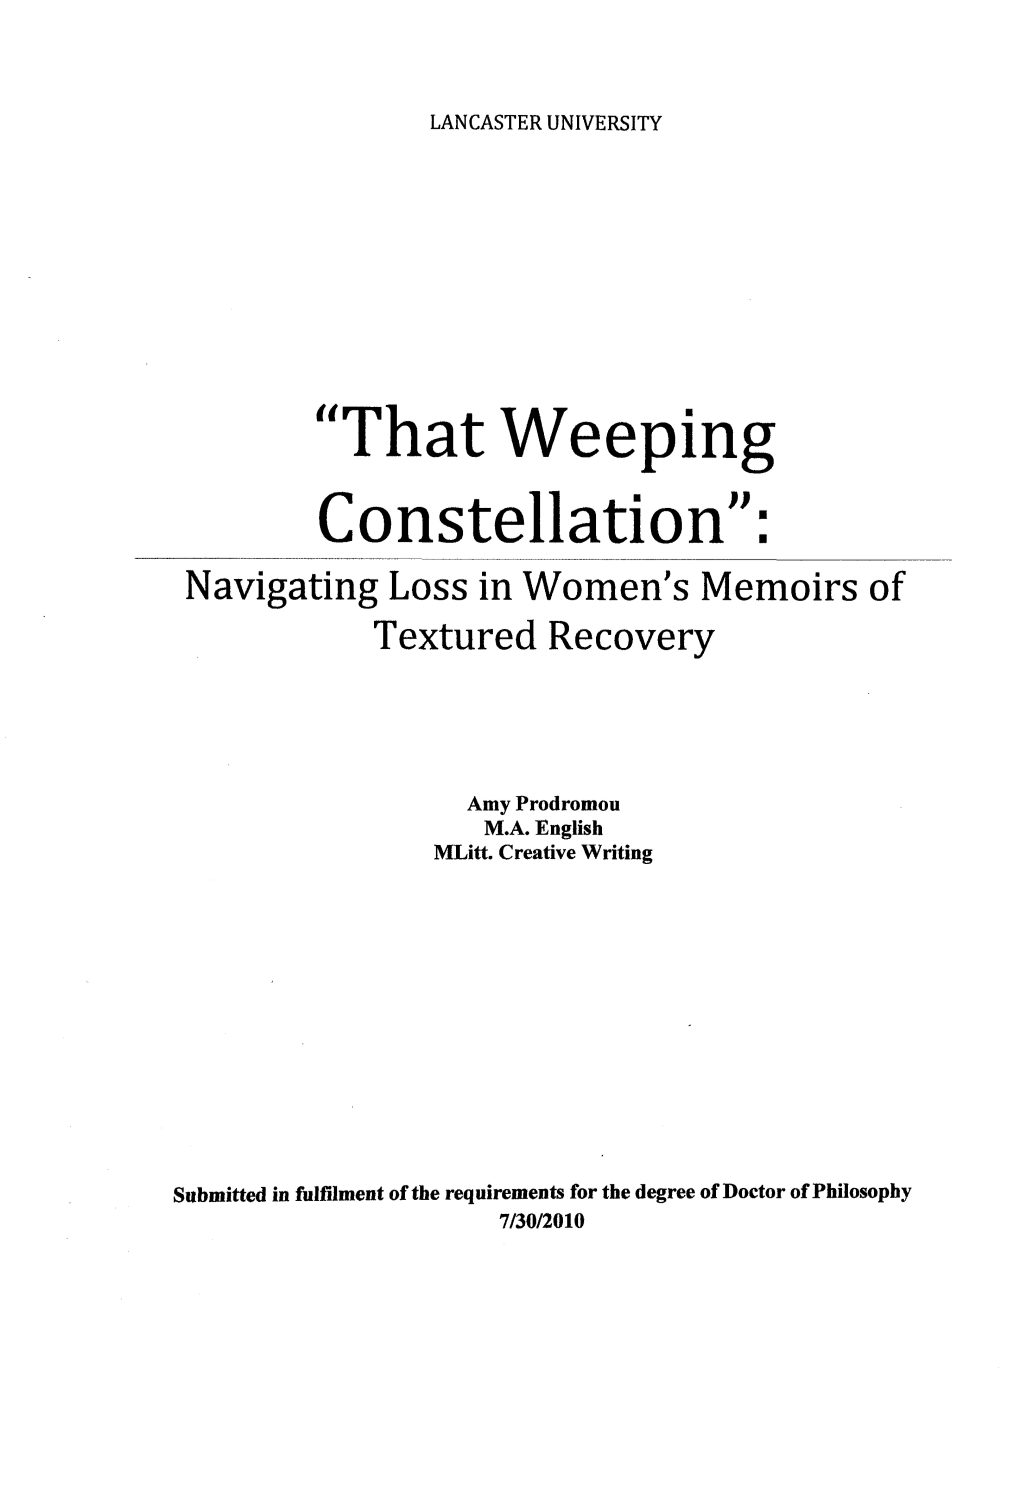 “That Weeping Constellation”: Navigating Loss in Women's Memoirs of Textured Recovery